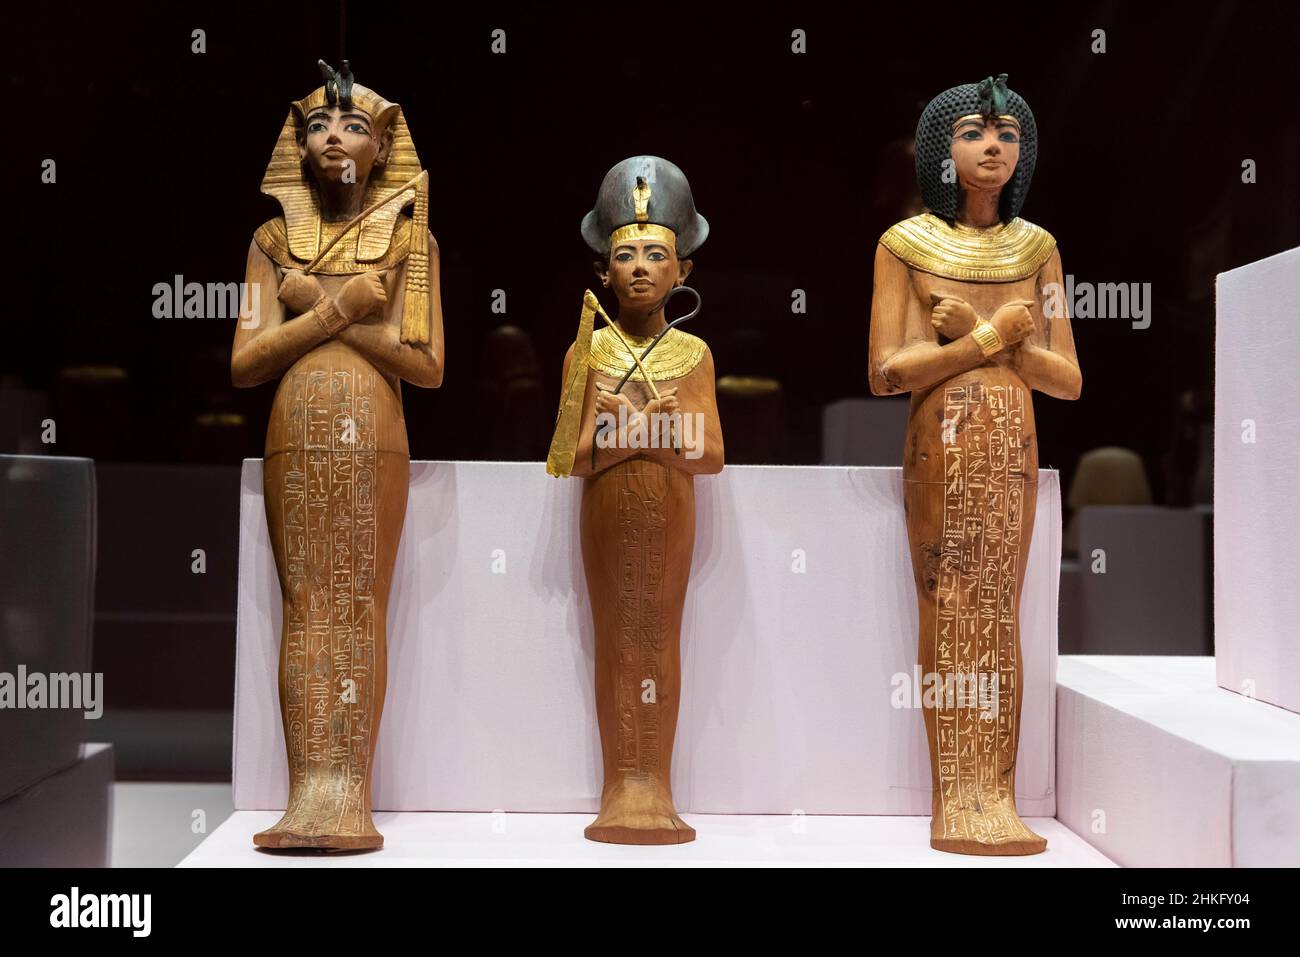 Egypt, Red Sea Governorate, Hurghada, Hurghada Museum, King Tut (Tutankhamun) wears Nubian Ring, the blue crown (Khepresh) and the 'Nemes' headdress, from the Valley of the Kings) Stock Photo